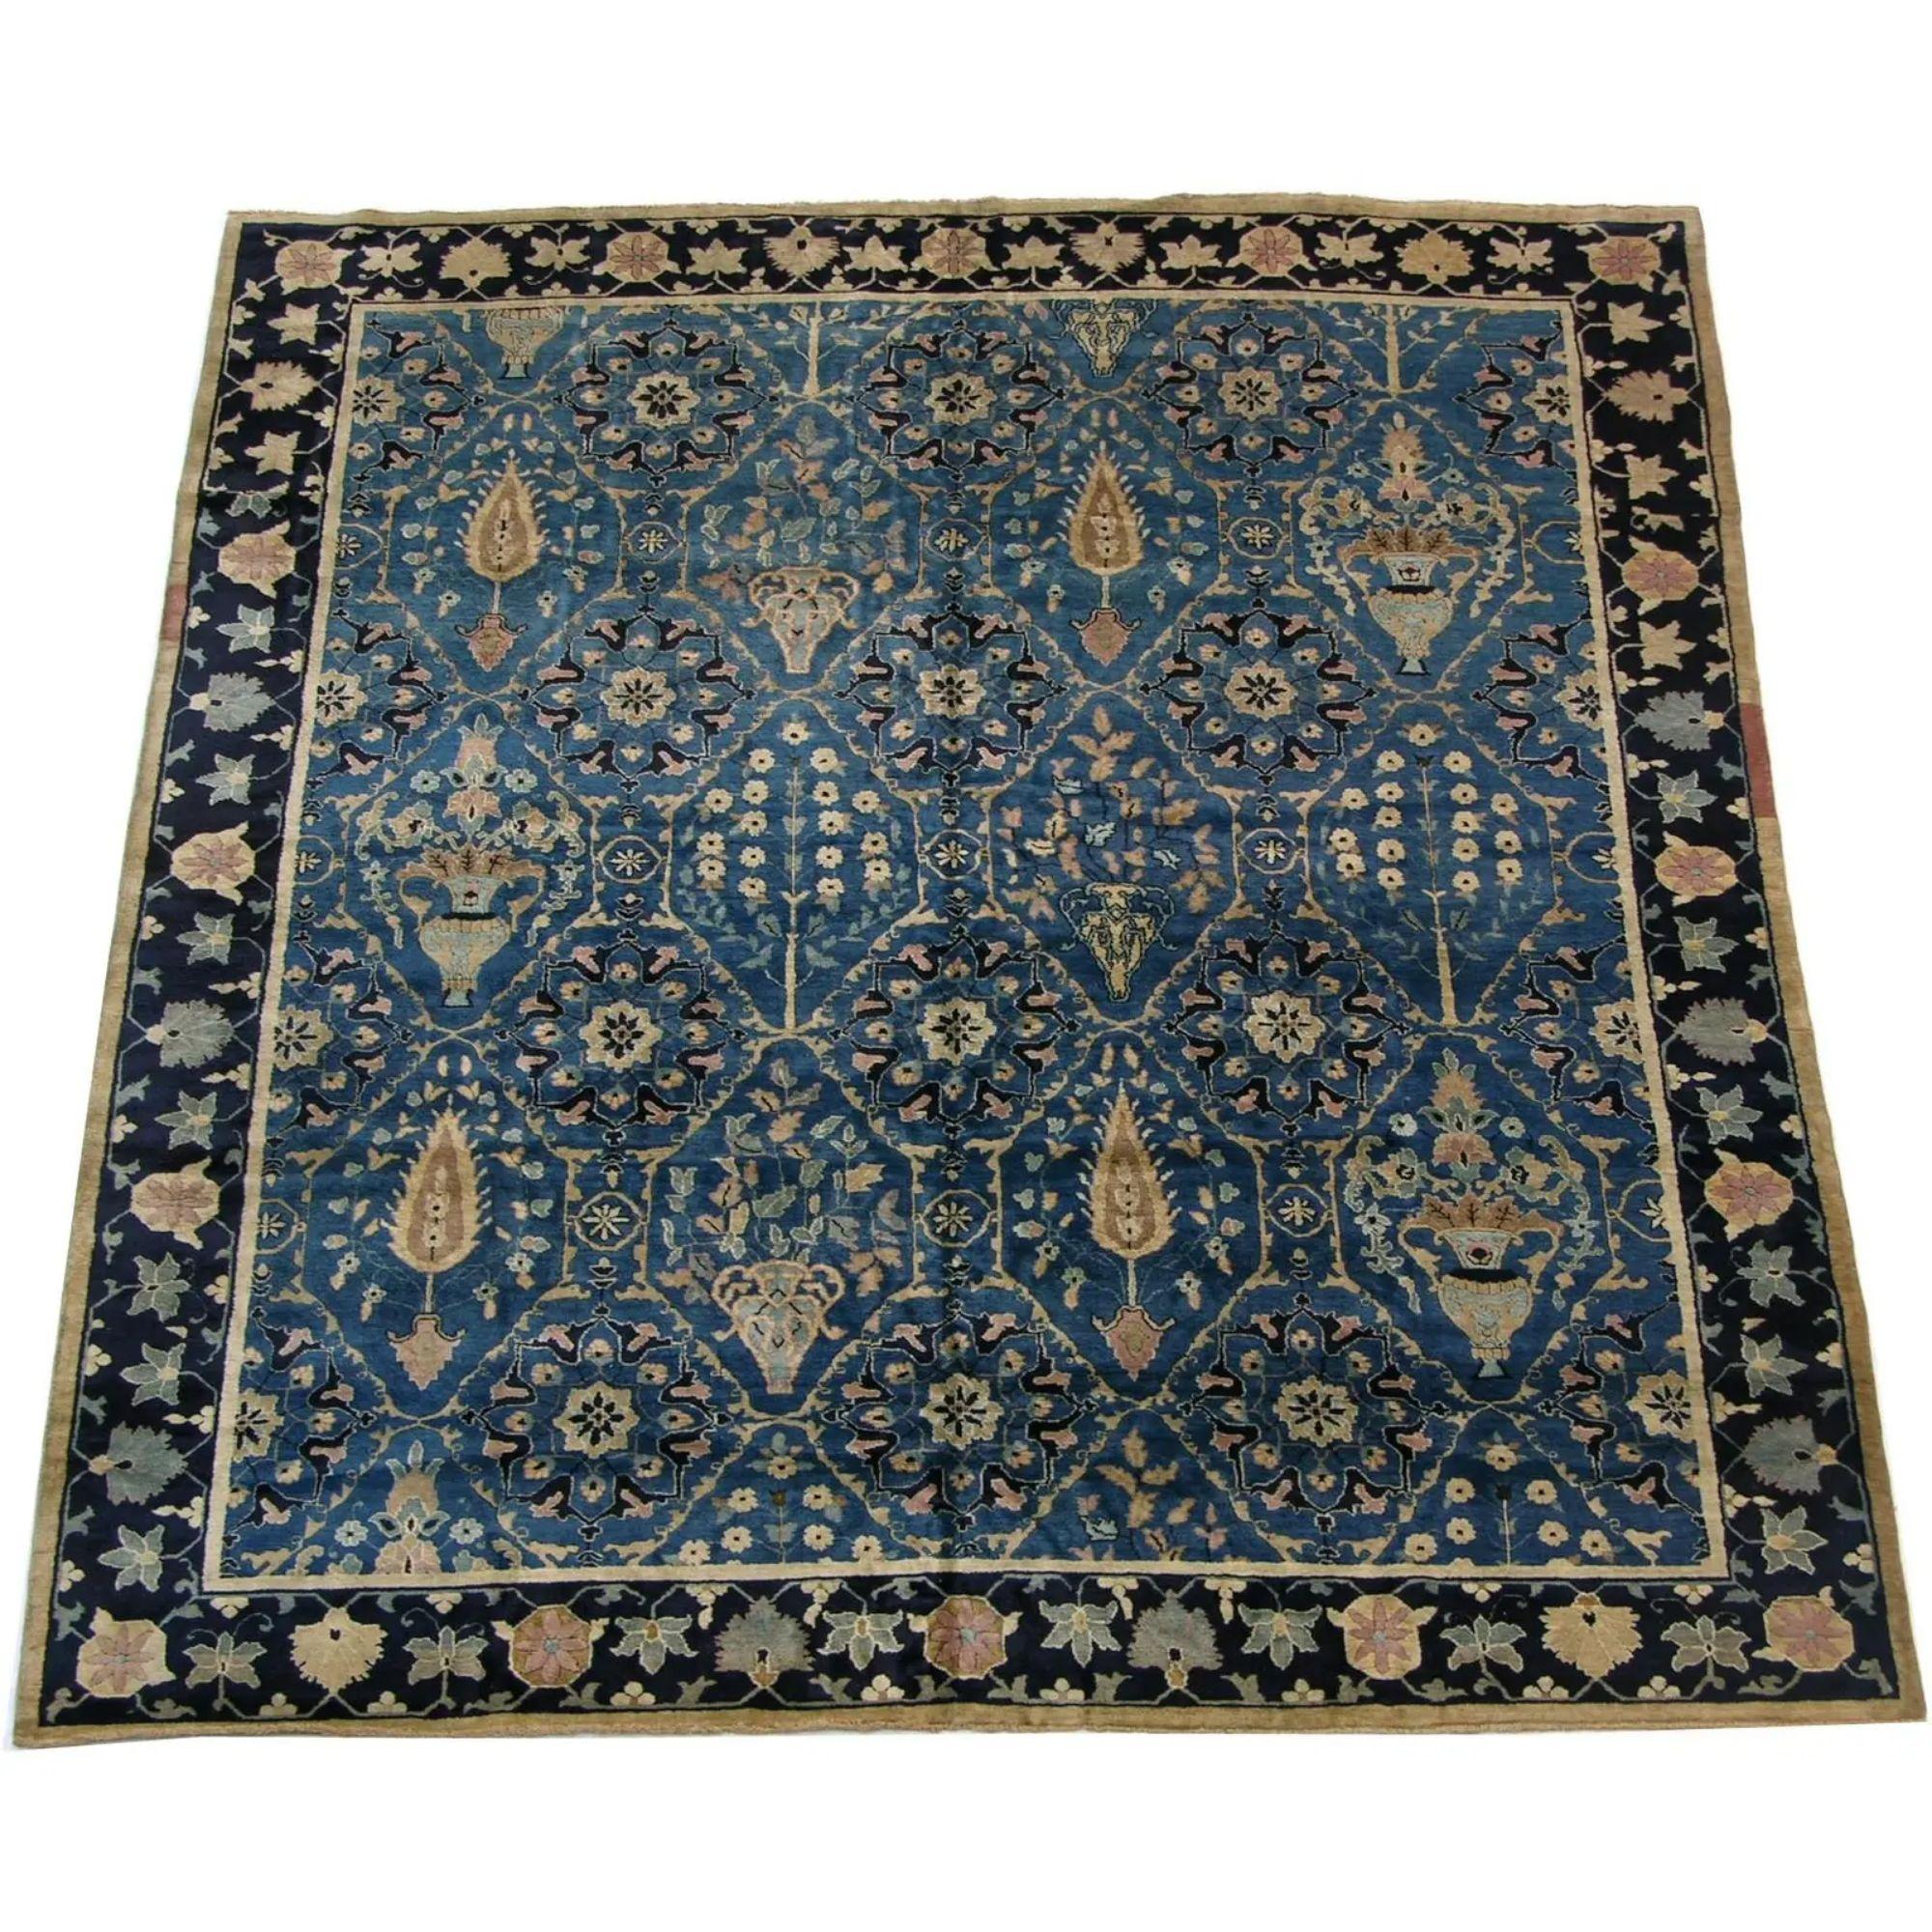 Early 20th Century 1990s Vintage Decorative Chinese Rug with Floral Design 10′2″ × 11′2″ For Sale